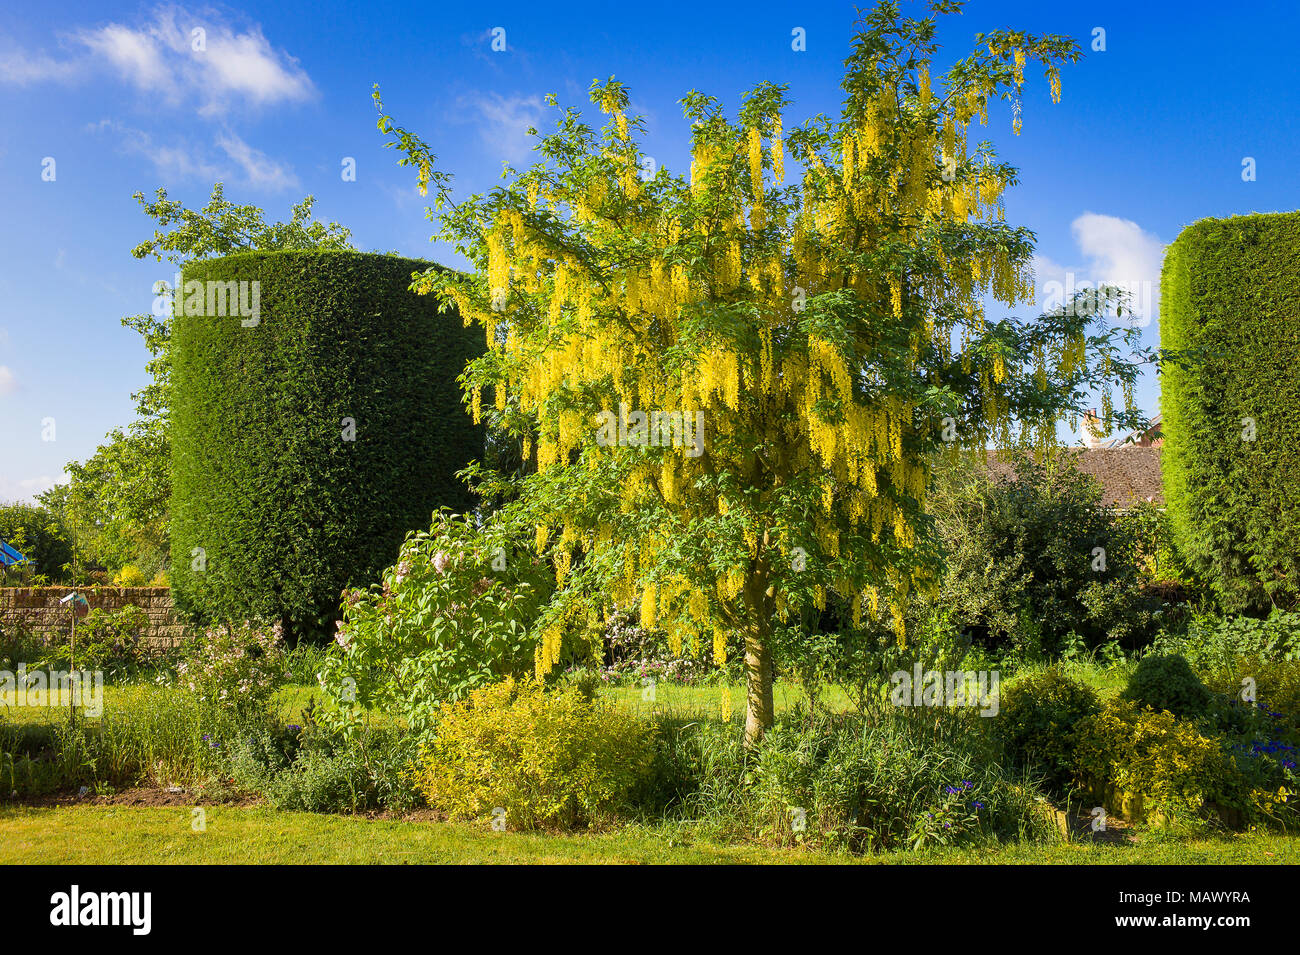 A Laburnum x watereri vossii tree flowering in an English garden in May together with a shapely leylandii conifer tree Stock Photo